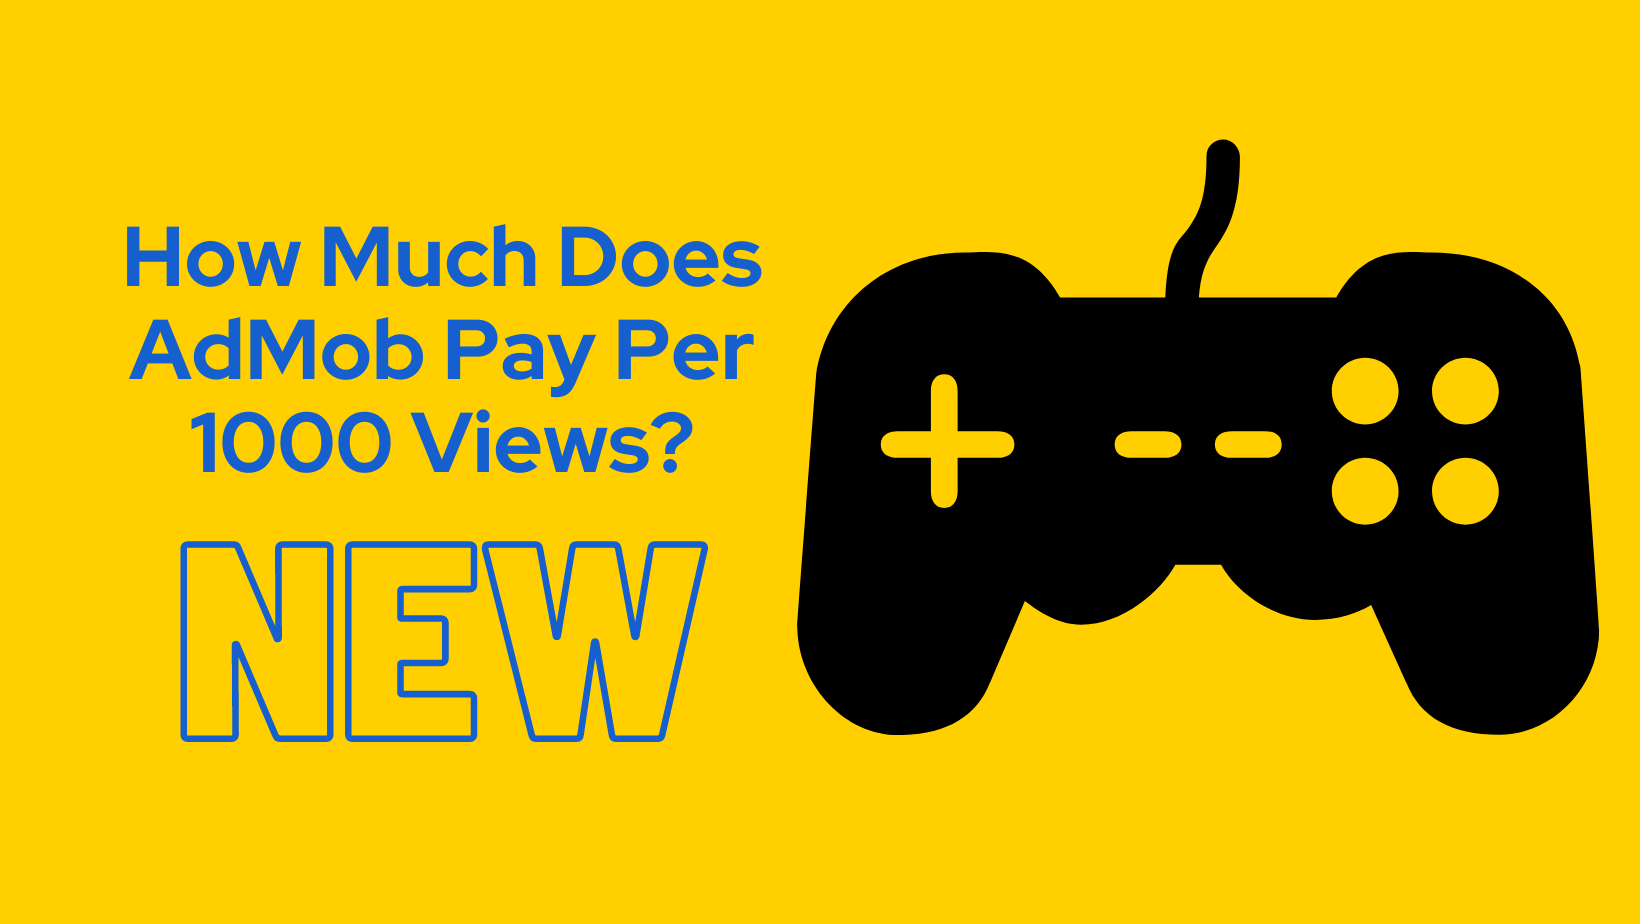 How Much Does AdMob Pay Per 1000 Views